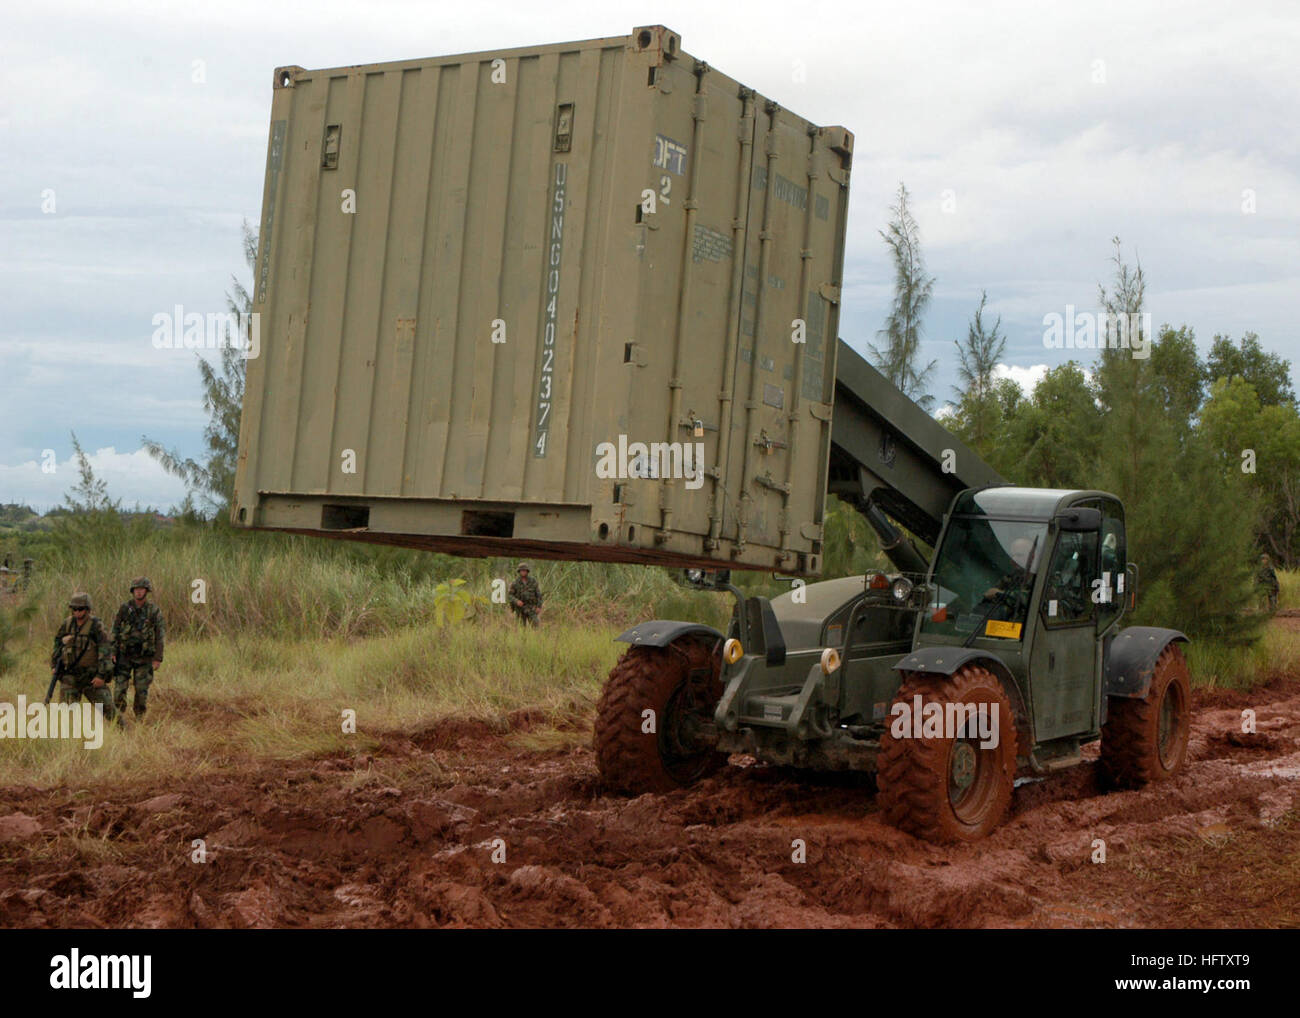 070820-F-8678B-050 GUAM (Aug. 20, 2007) Ð Construction Mechanic 1st Class Kenneth E. Terlaan drives a extendable boom forklift through the mud to position a CONEX box containing the field armory during setup for a field exercise. Naval Mobile Construction Battalion 4 is deployed to Guam in support of construction requirements for Pacific Command. U.S. Air Force photo by Air Force Master Sgt. Rickie D. Bickle (RELEASED) US Navy 070820-F-8678B-050 Construction Mechanic 1st Class Kenneth E. Terlaan drives a extendable boom forklift through the mud to position a CONEX box containing the field armo Stock Photo